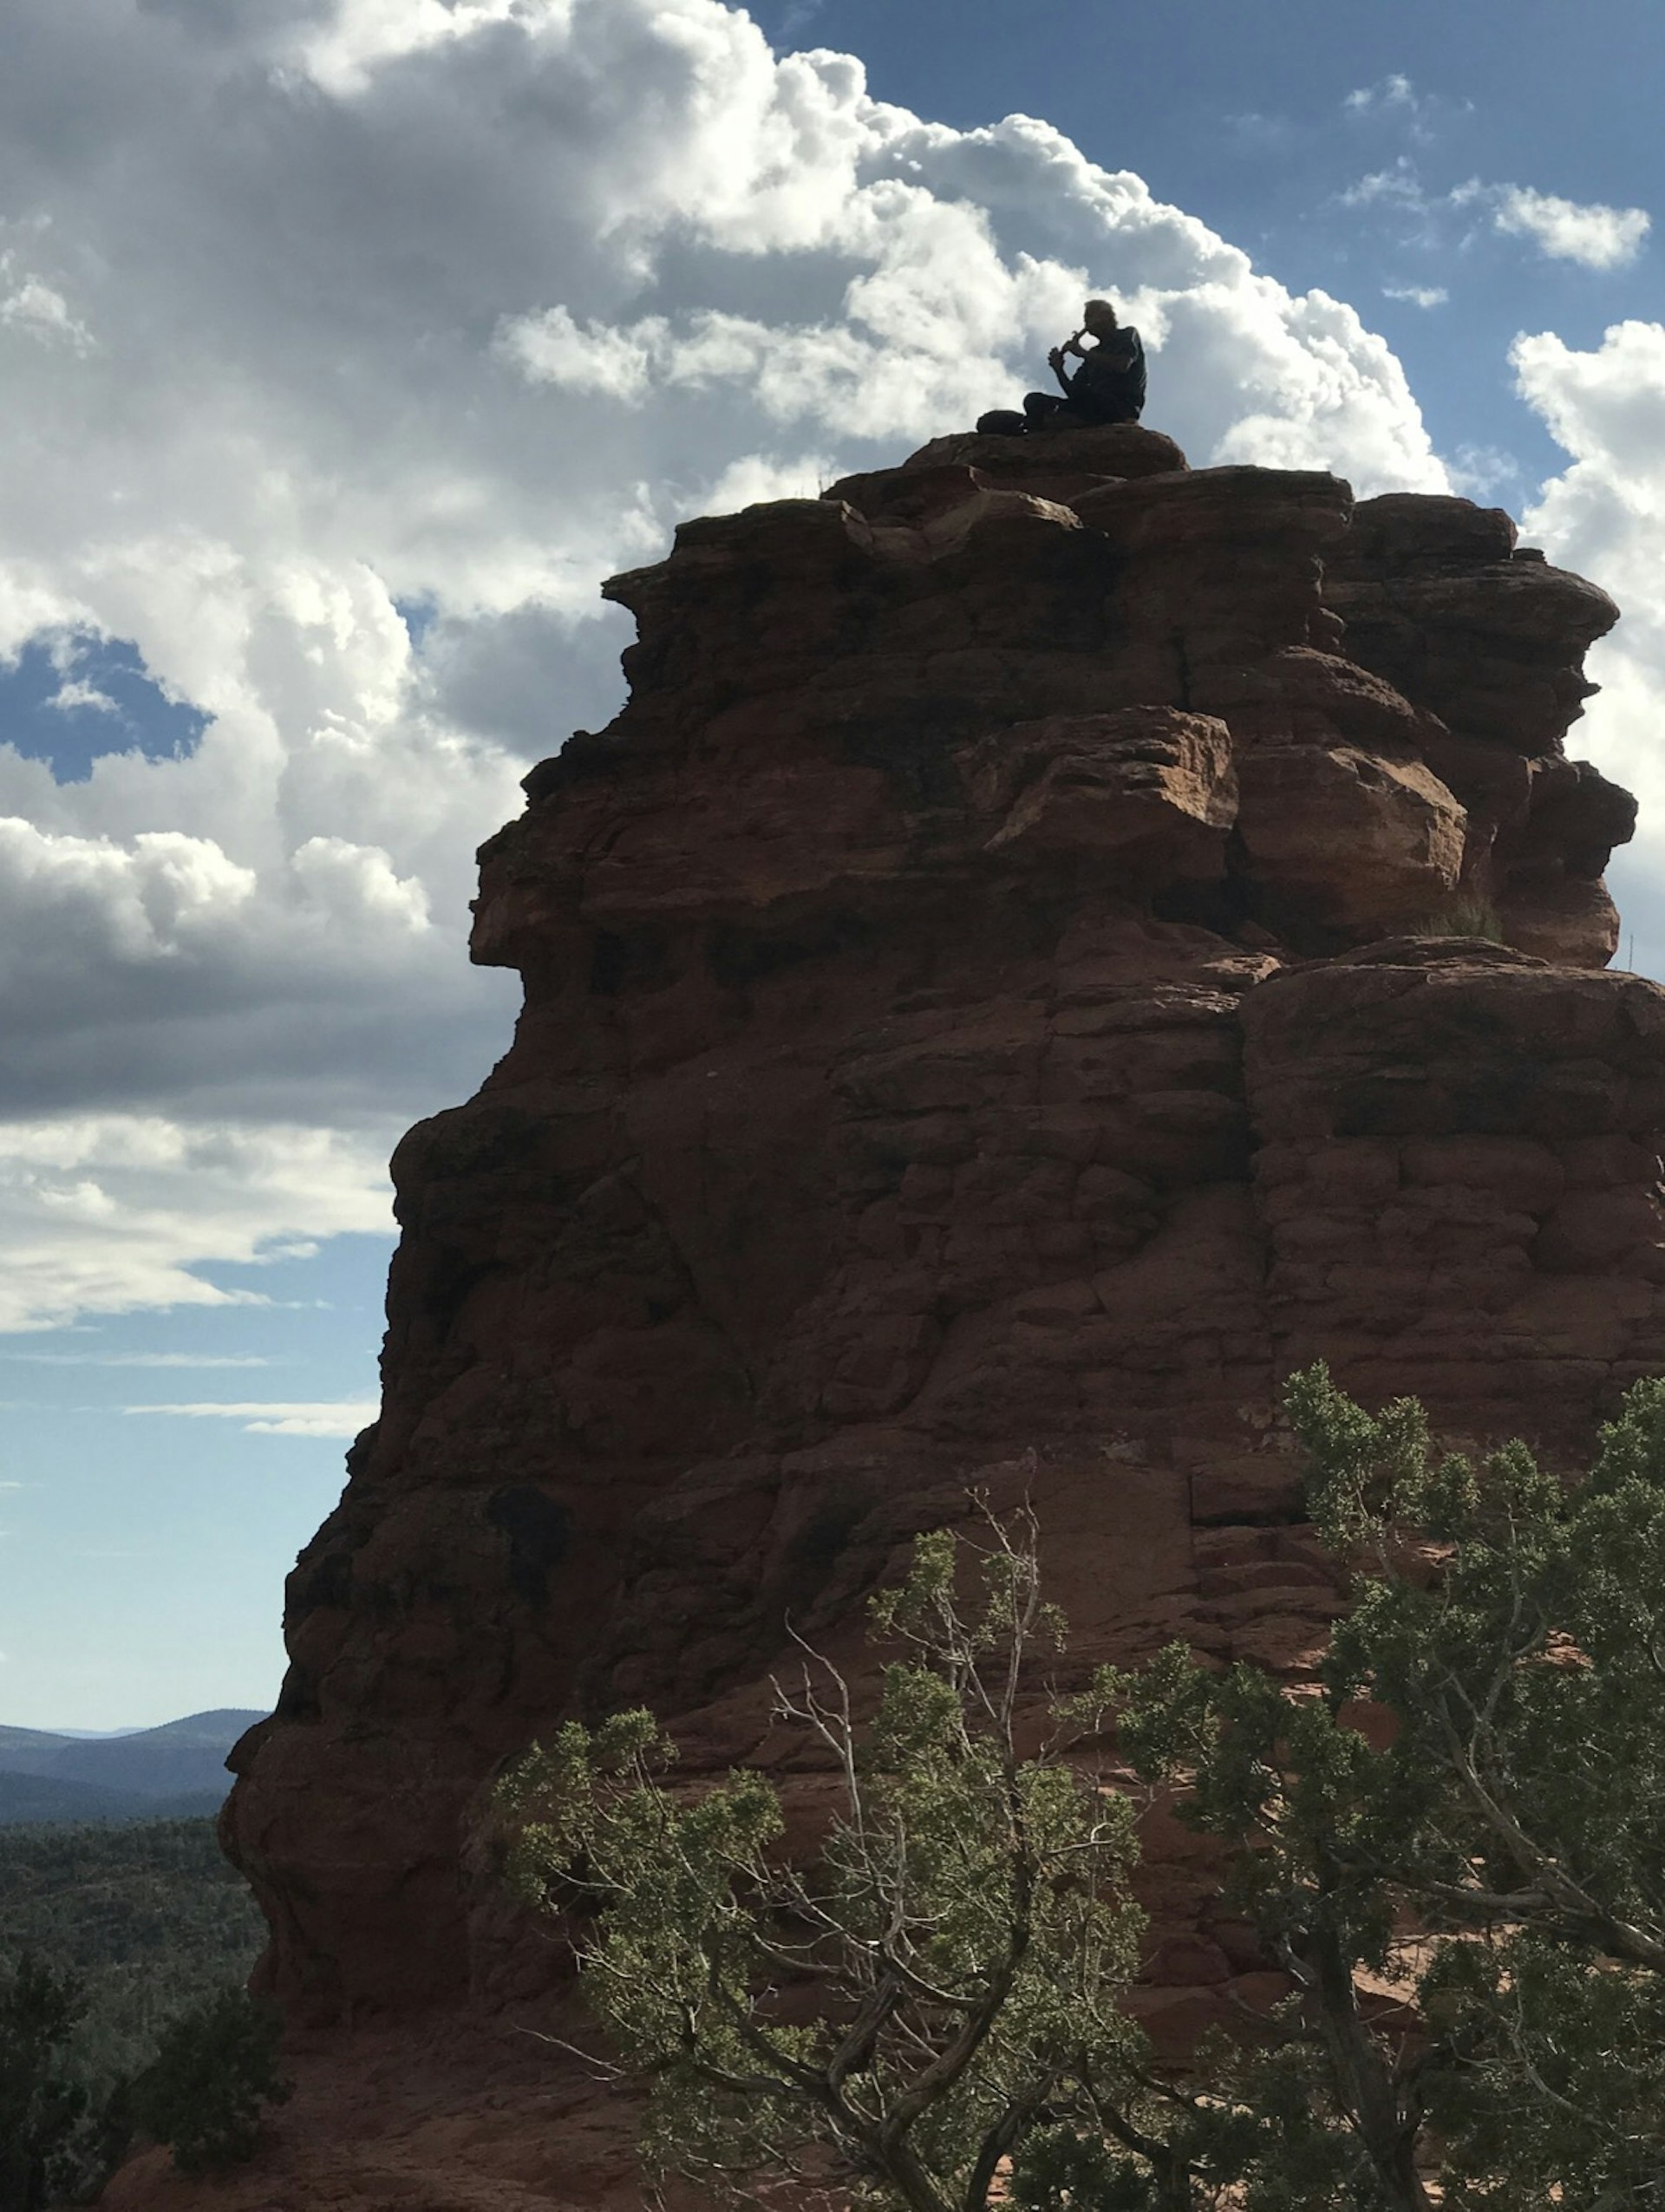 A man sits on top of a rock formation as clouds fill the sky around him